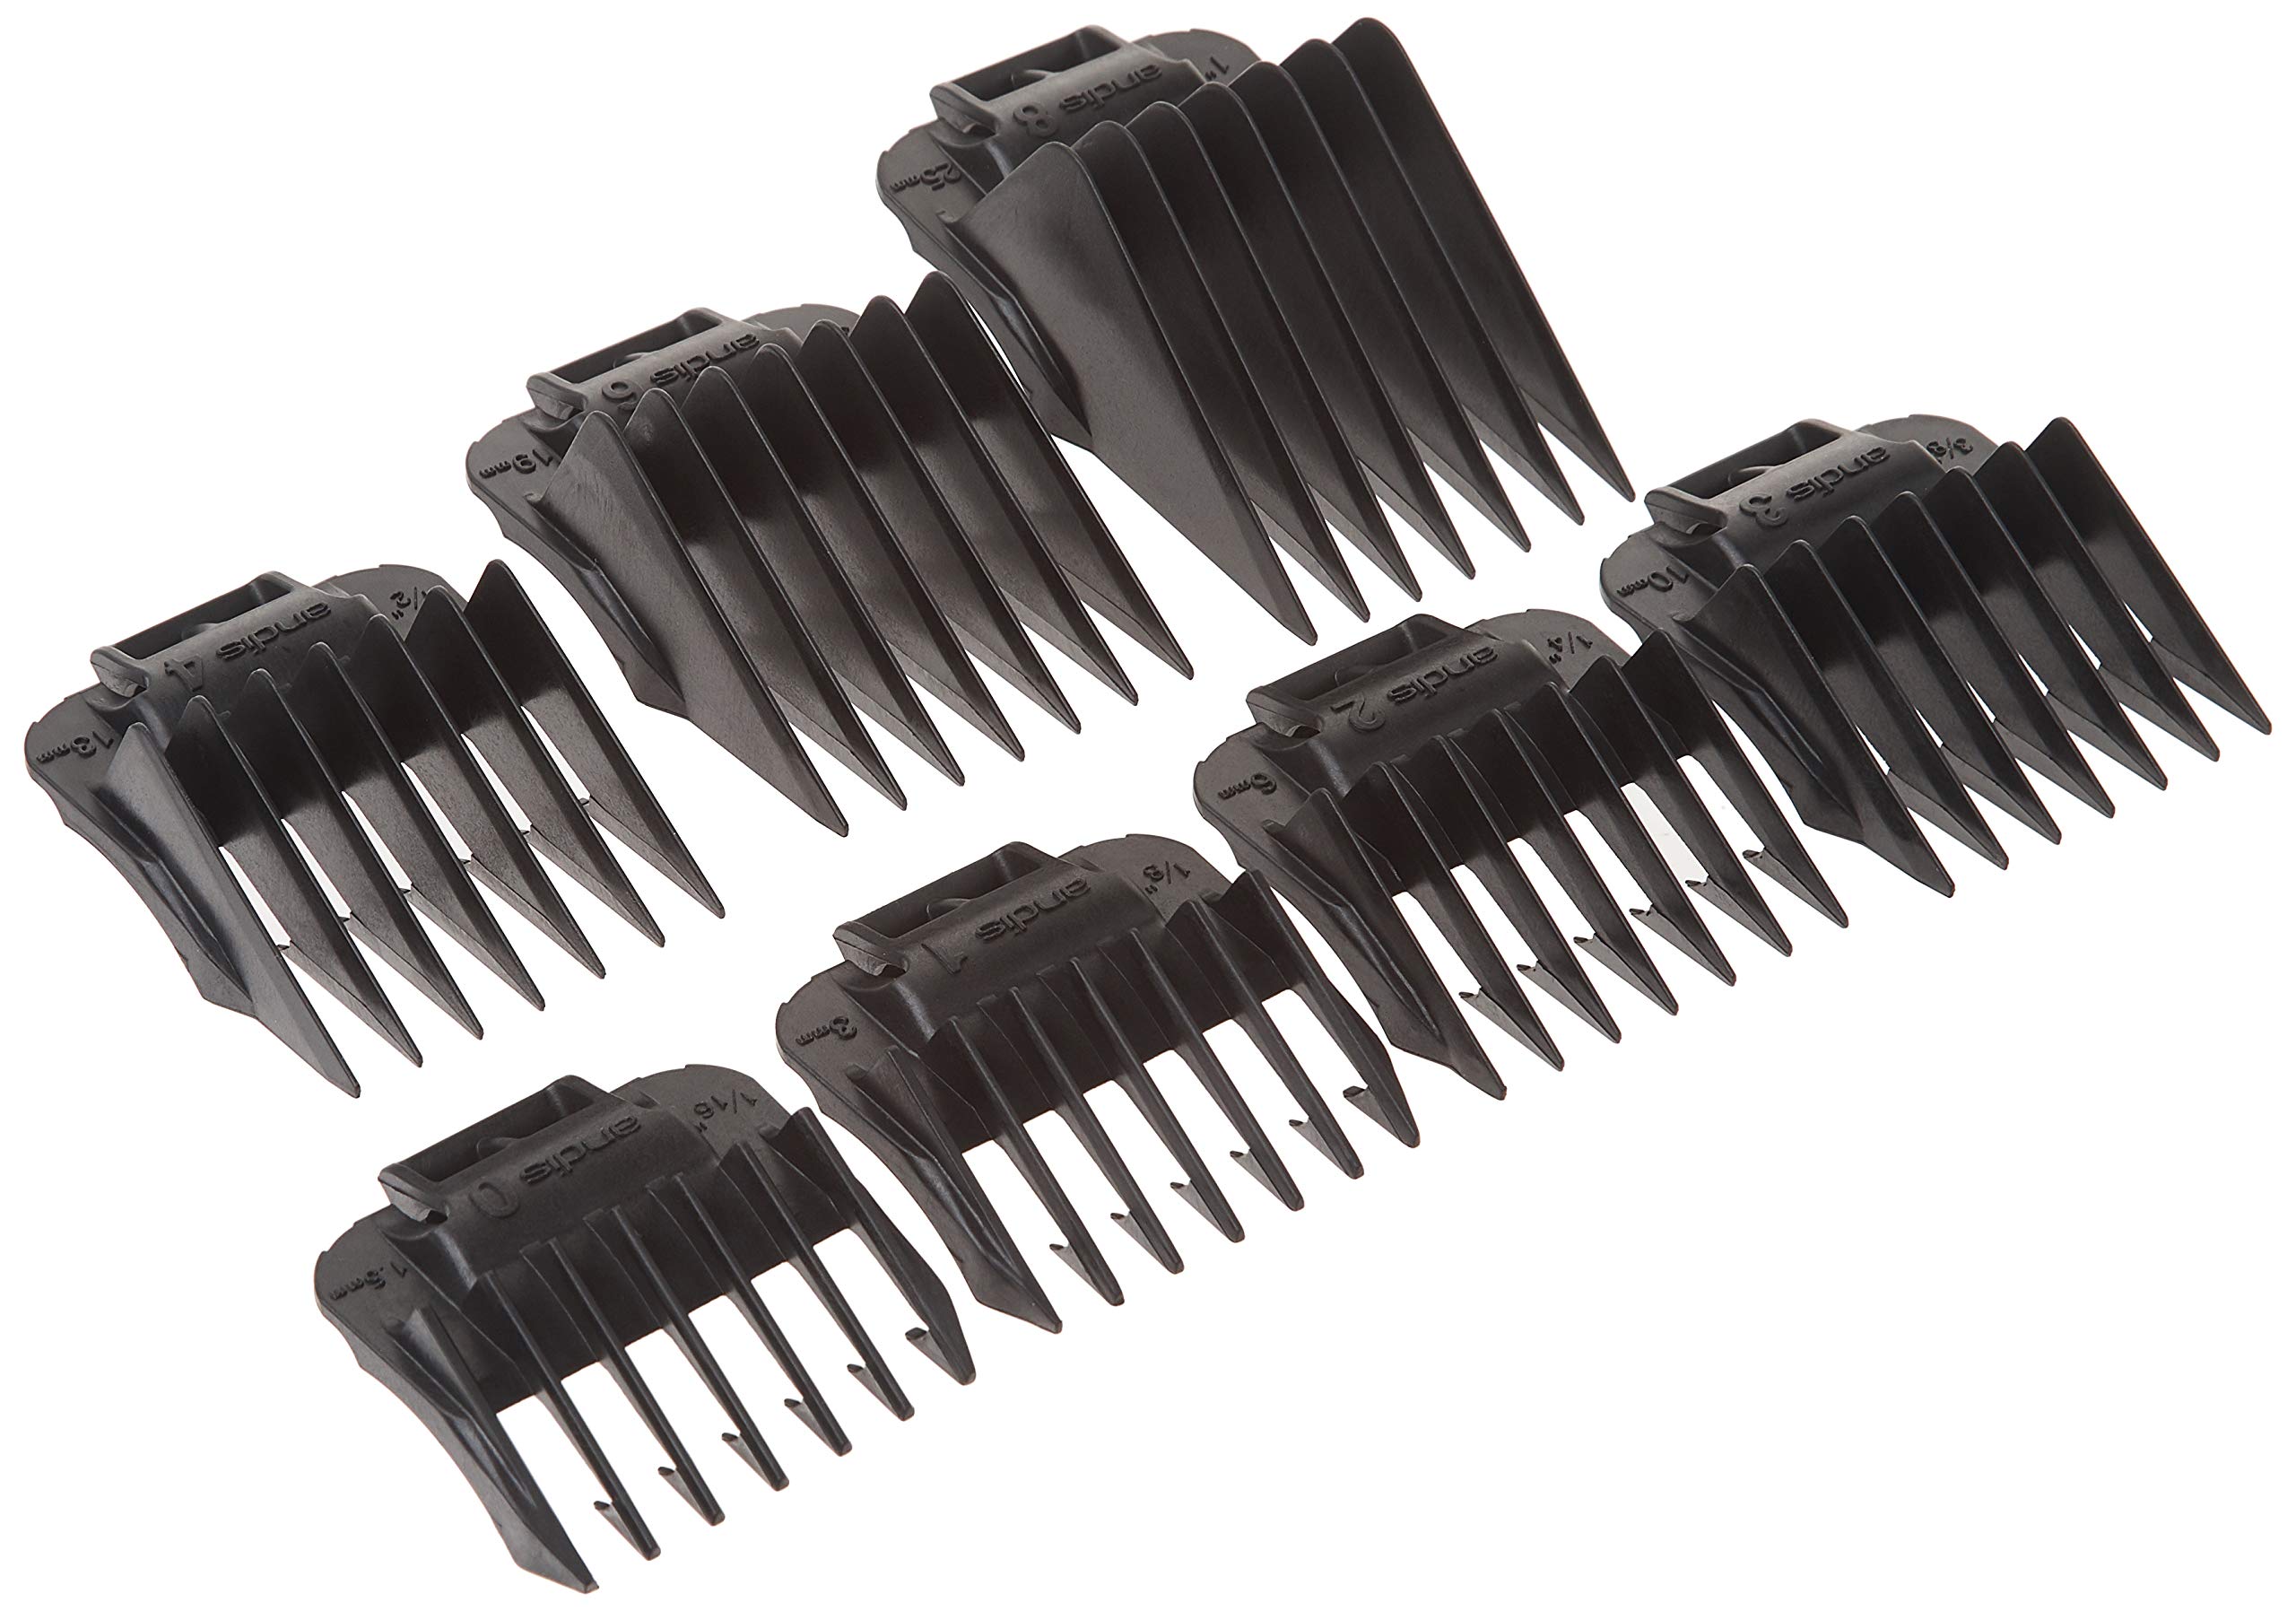 Andis 01380 7-piece Snap-On Comb Set - Easy to Use, Perfect Grooming Tool – Blade Attachments for MBA, ML & SM Model Trimmers - Black